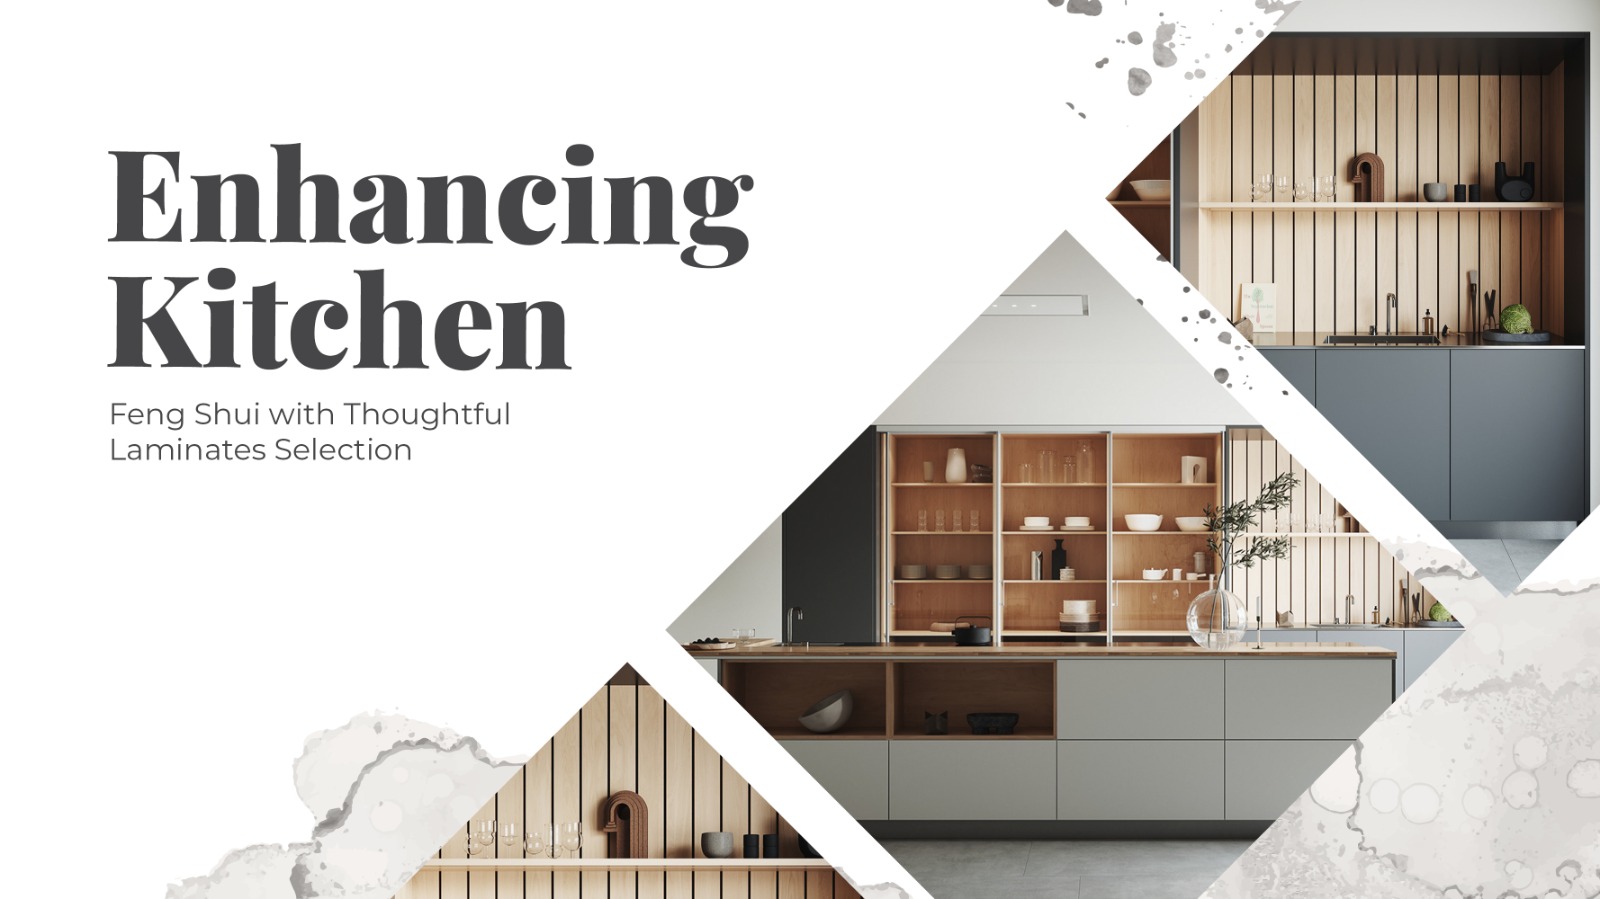 Enhancing Kitchen Feng Shui with Thoughtful Laminates Selection